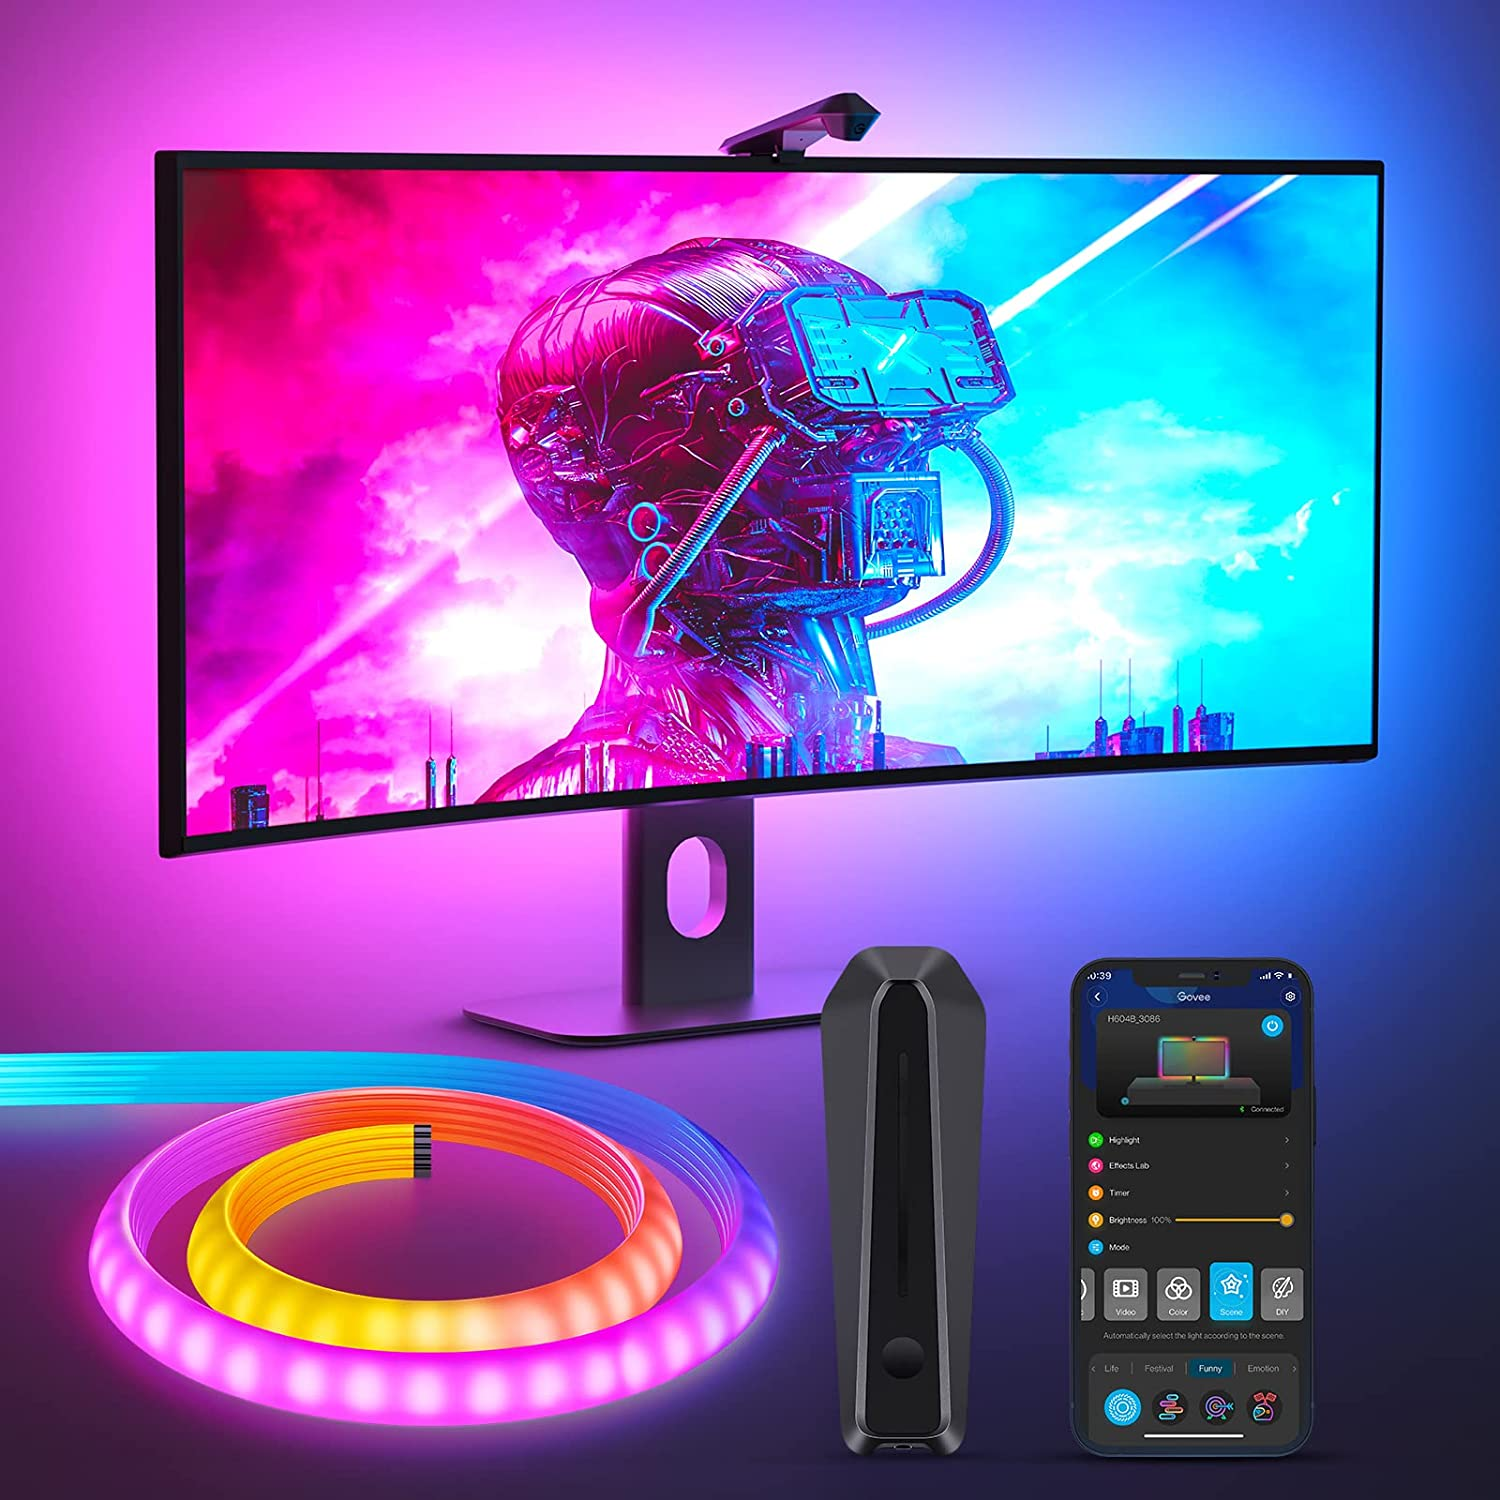 Govee DreamView G1 Gaming Light para Monitor 24"-32" PC con WiFi Alexa y Google Assistant